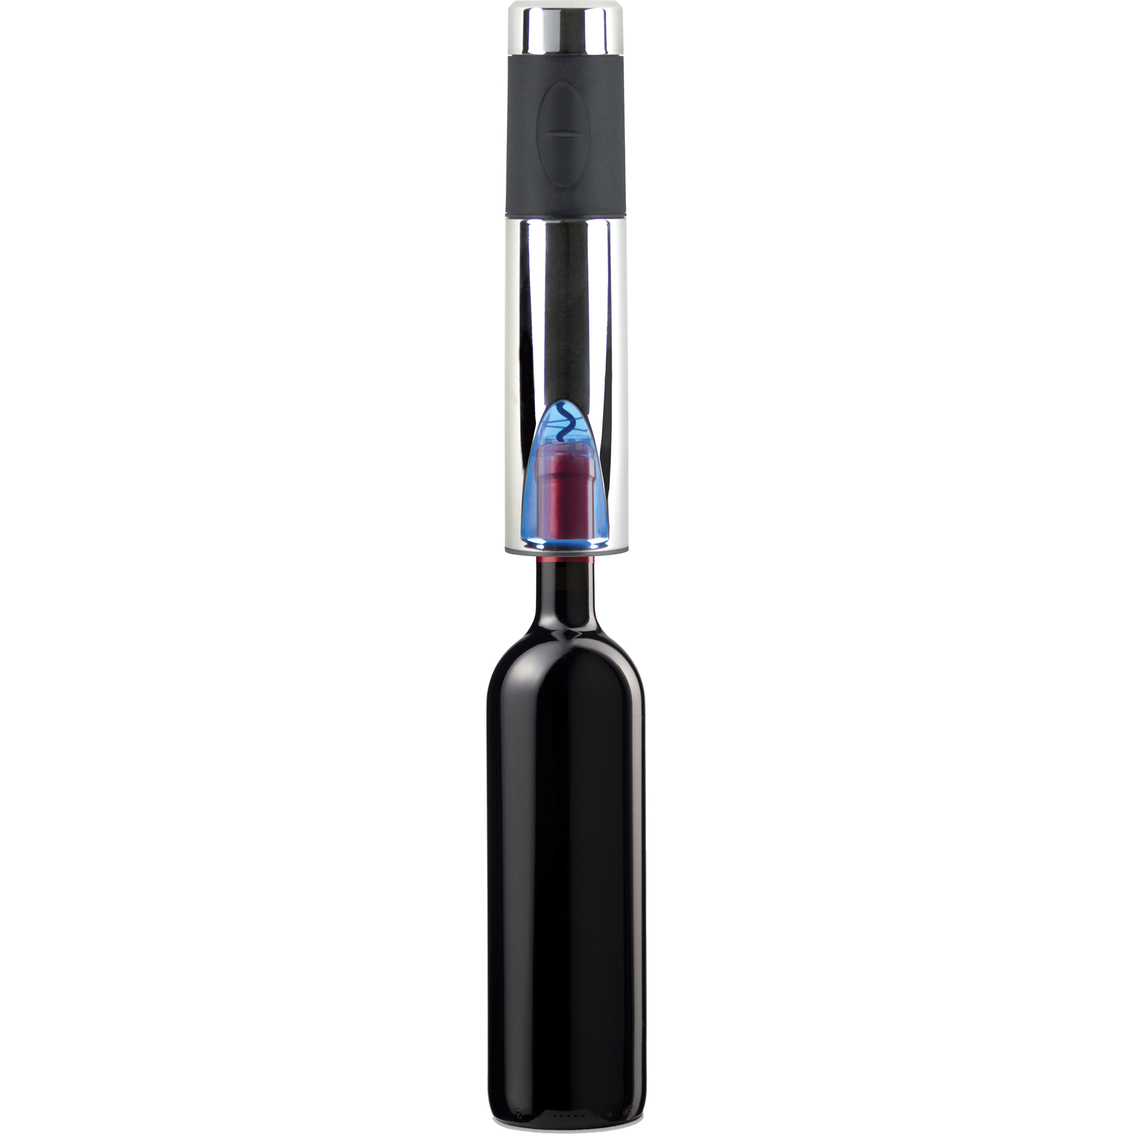 Vinturi Rechargeable Wine Opener with Base and Foil Cutter - Image 2 of 7